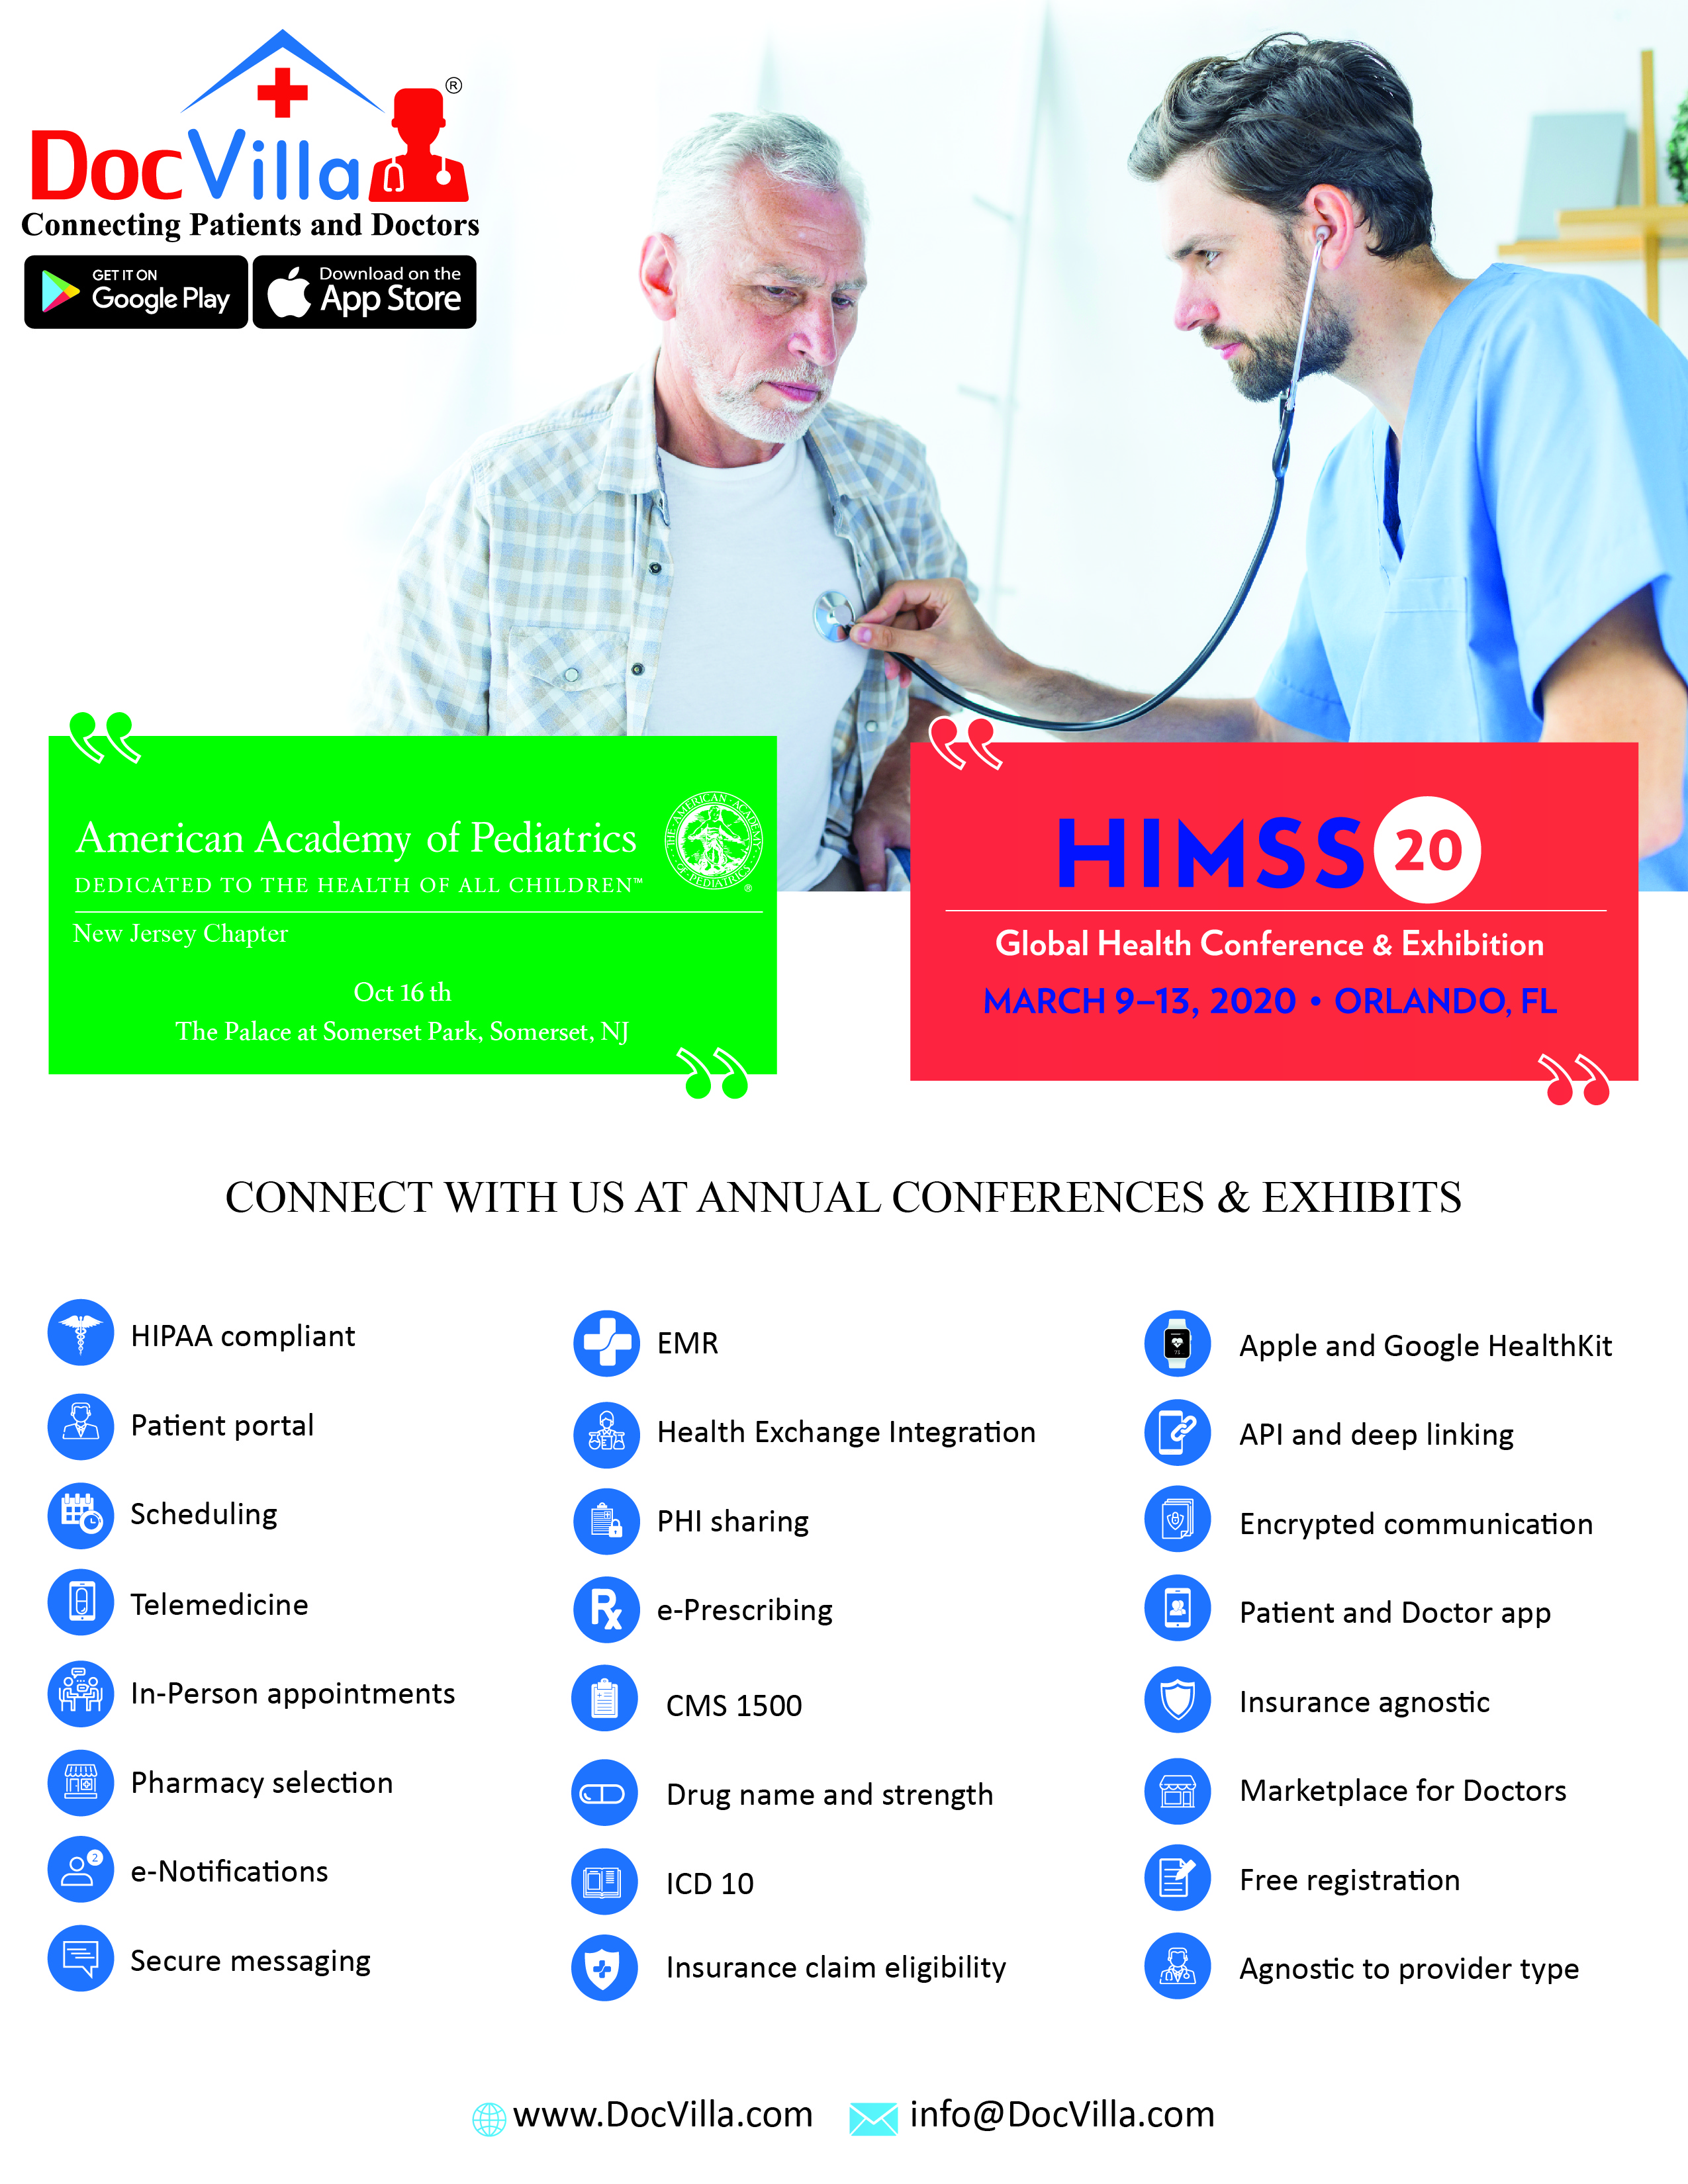 HIMSS20 and NJAAP annual conference